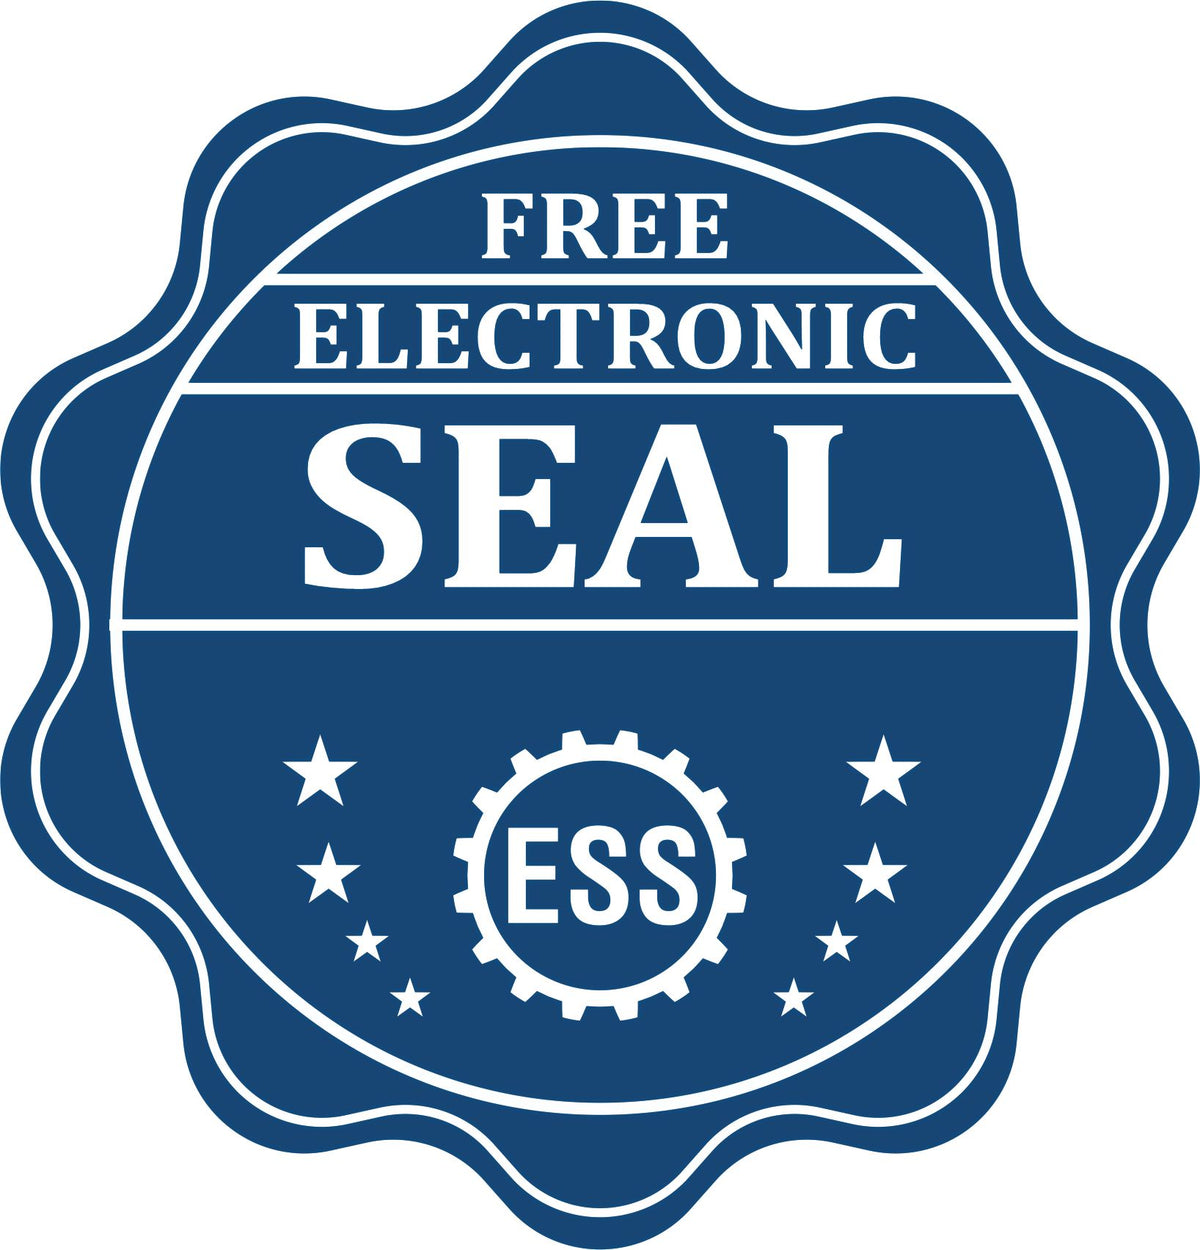 A badge showing a free electronic seal for the Wooden Handle Arizona State Seal Notary Public Stamp with stars and the ESS gear on the emblem.